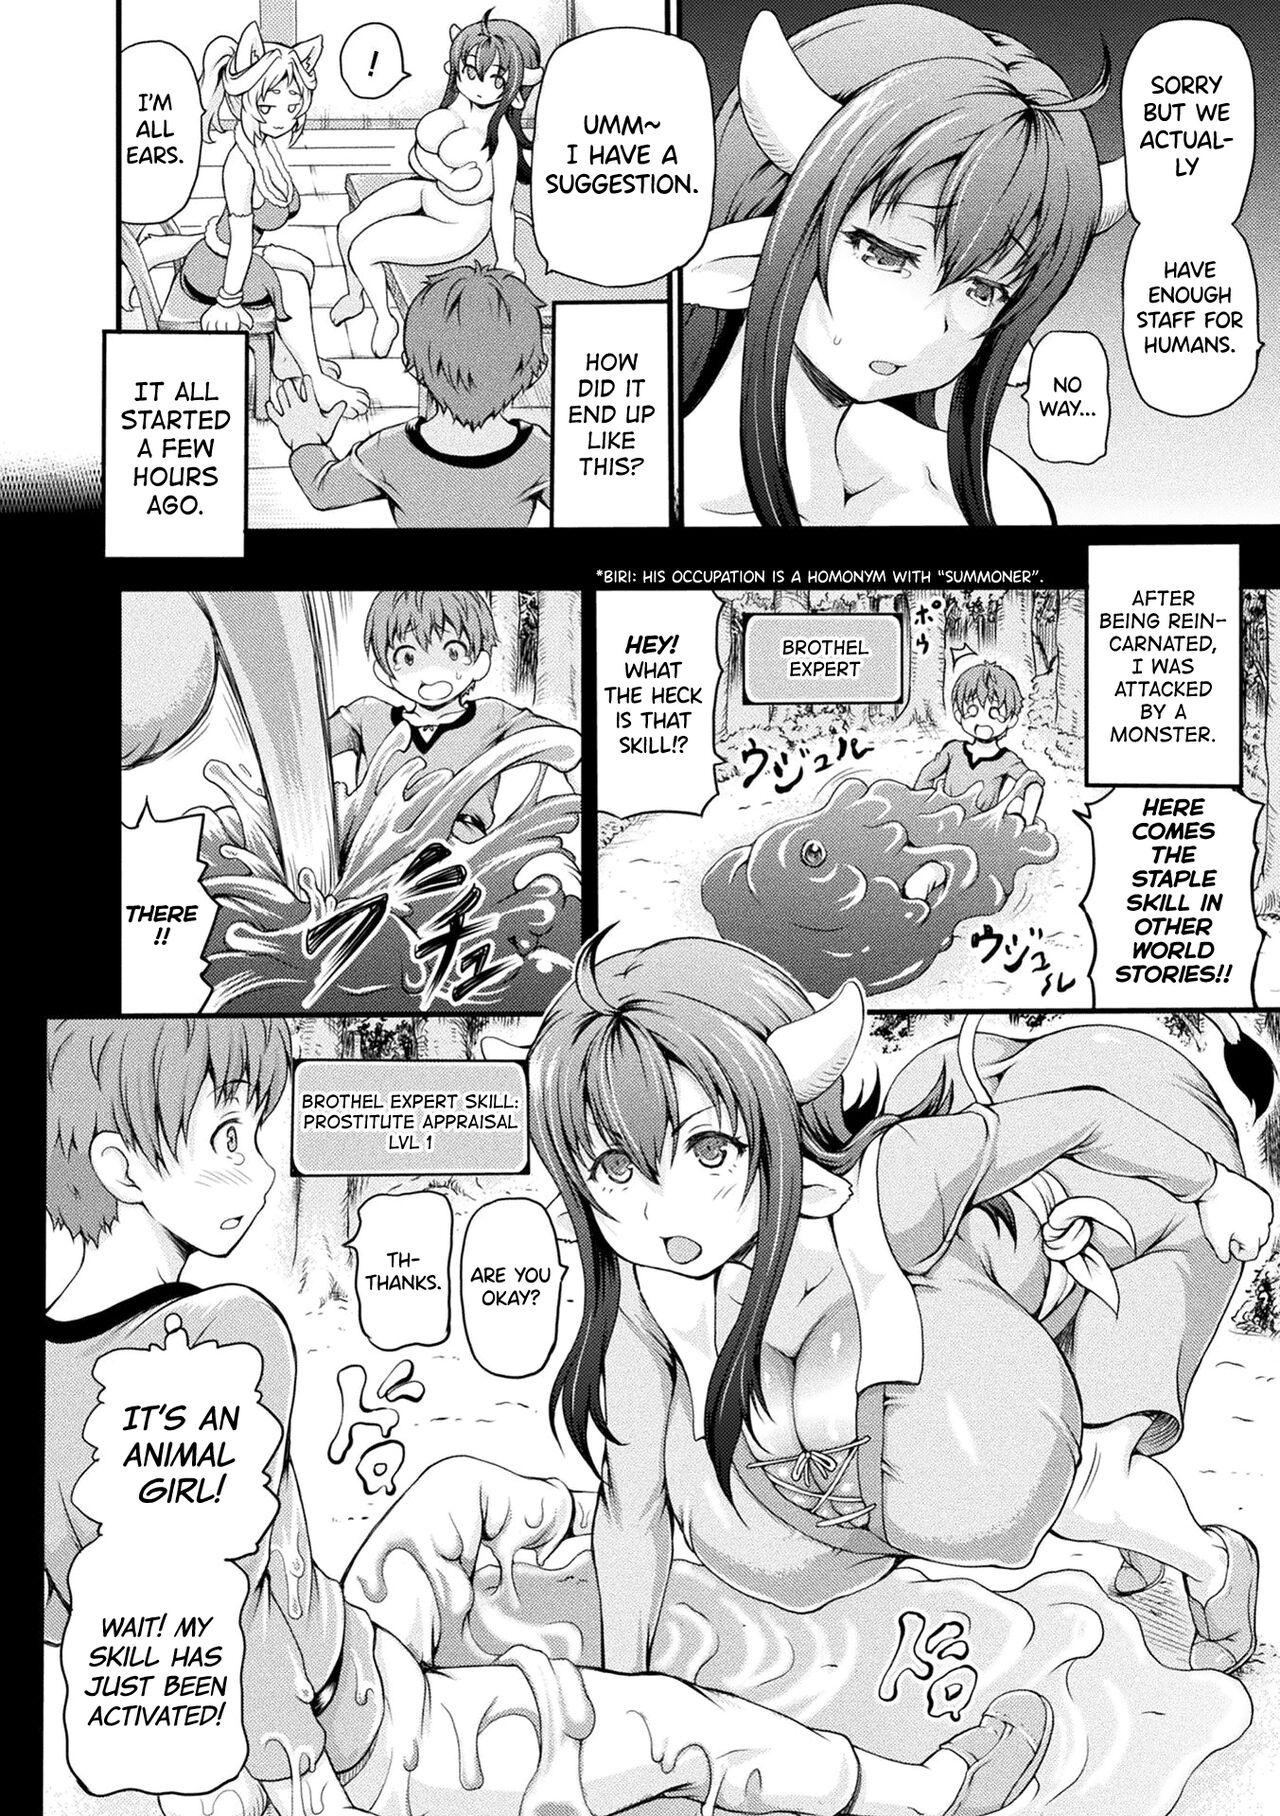 Jerking Off Isekai Shoukan Ch.1-2 Mexicano - Page 2